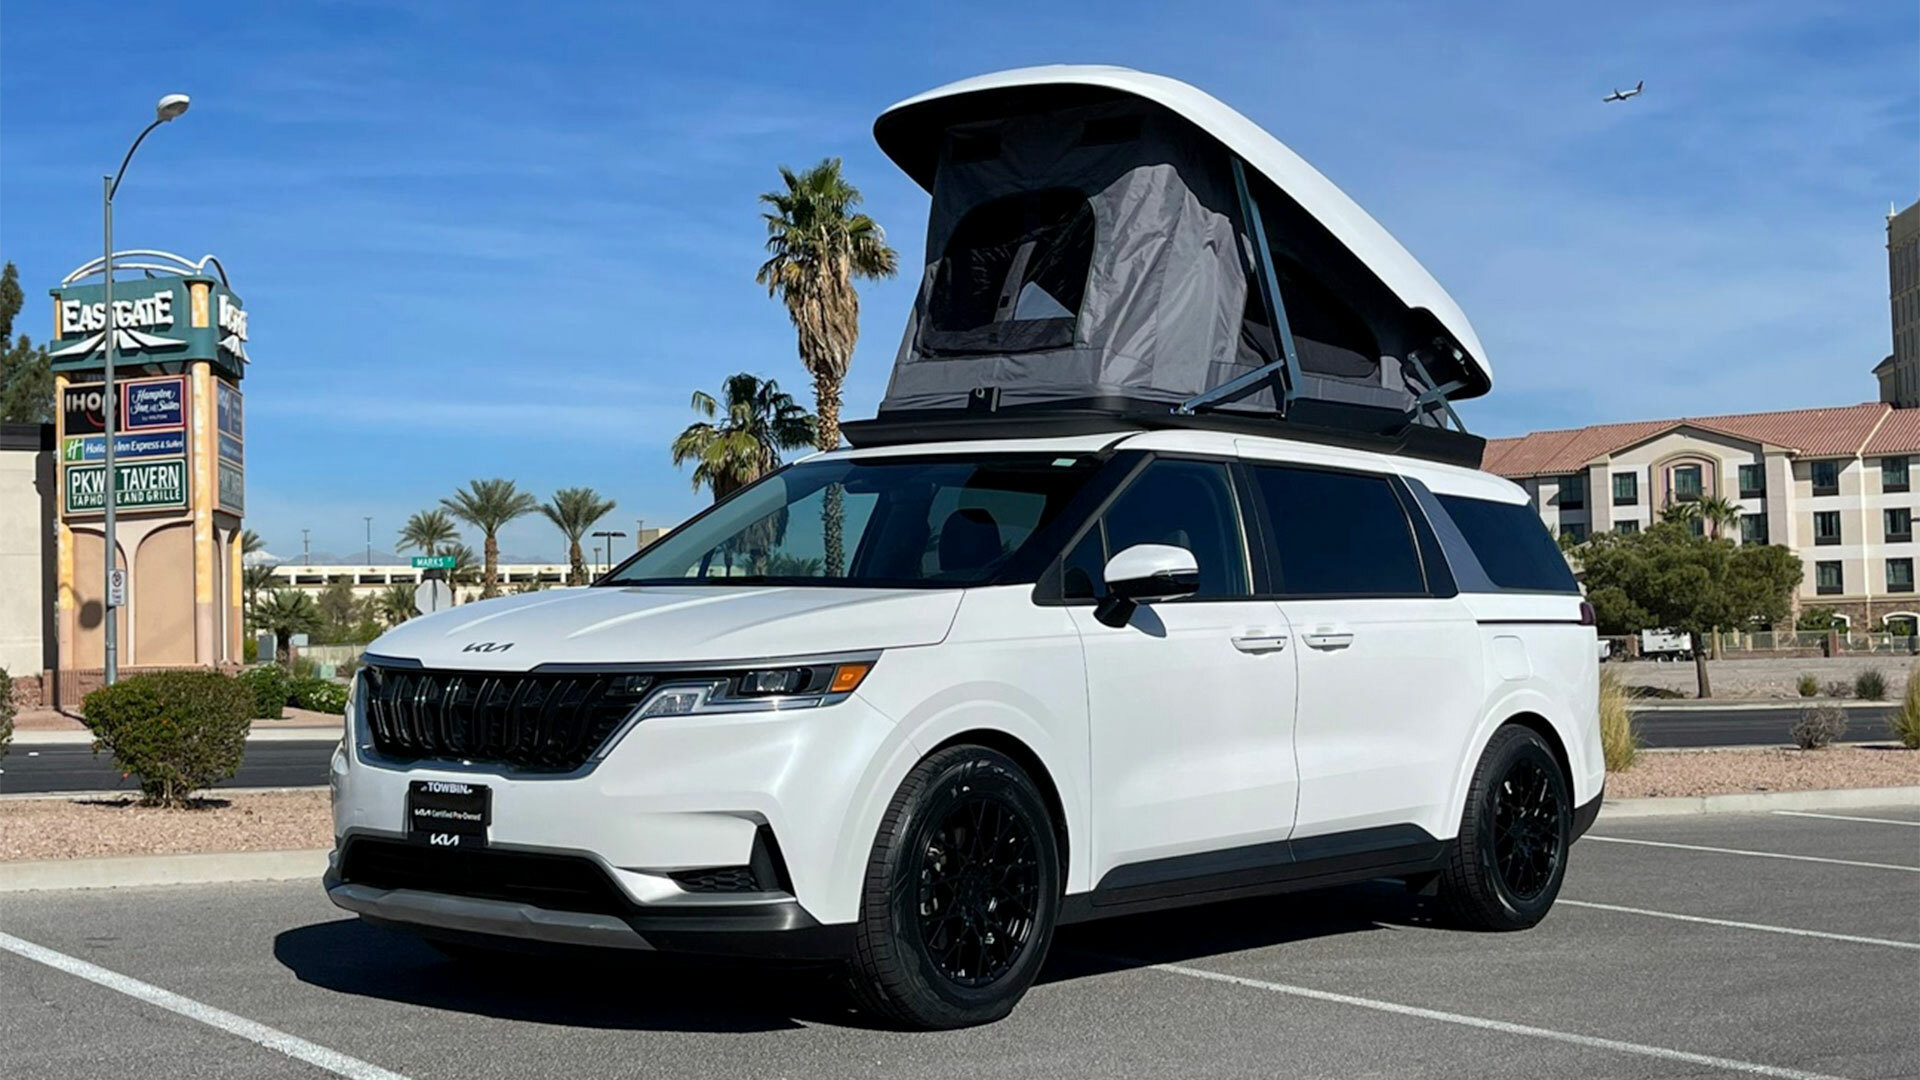 Turn Your Kia Carnival Into A Luxury Camper With UniCamp's $16,000